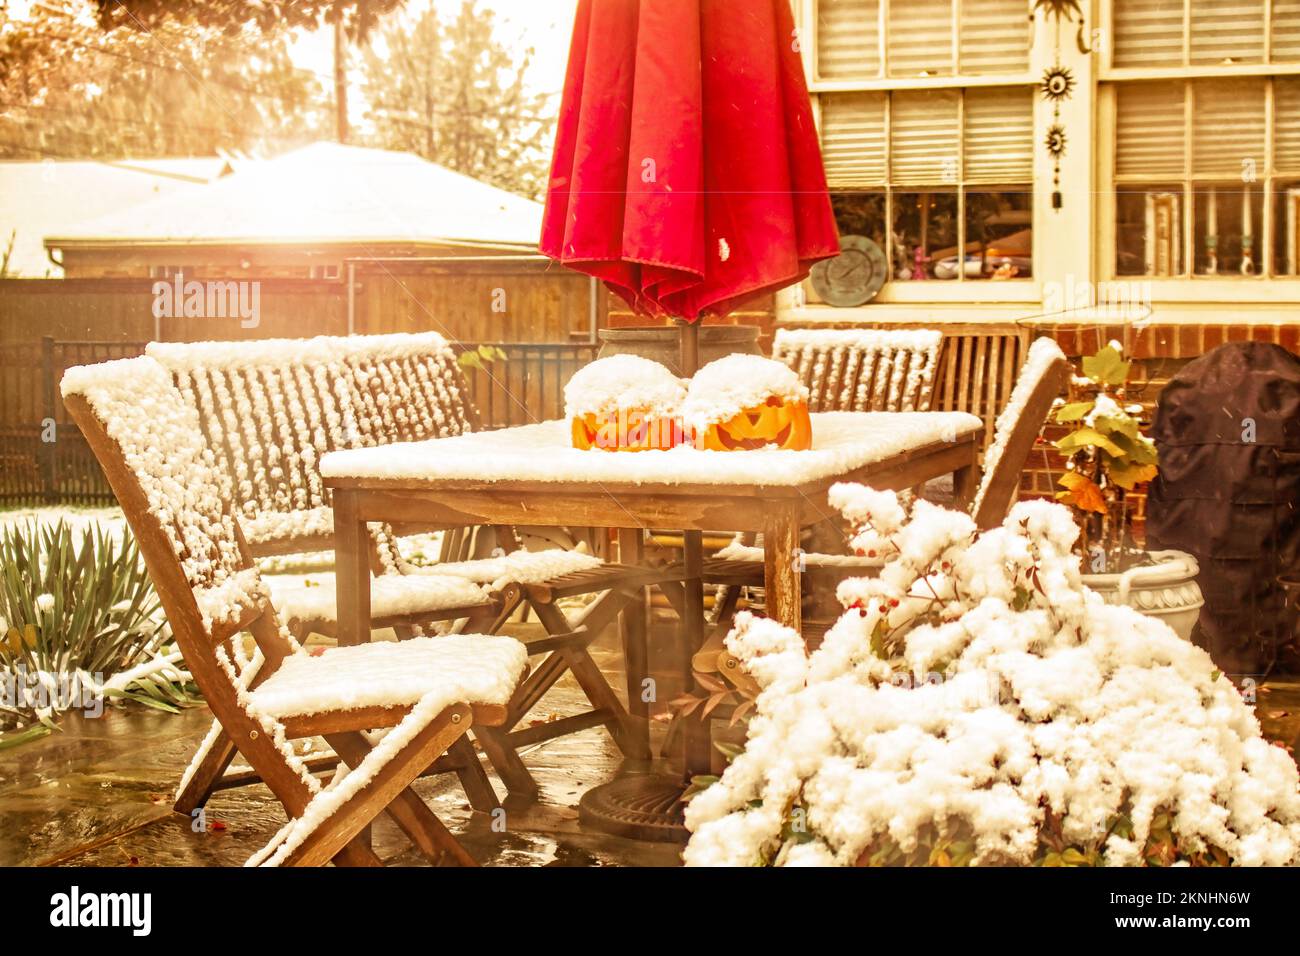 Early snow - outdoor table and chairs with two jack o lanterns and a sun umbrella on a patio during a snow shower with house windows and urban neighbo Stock Photo